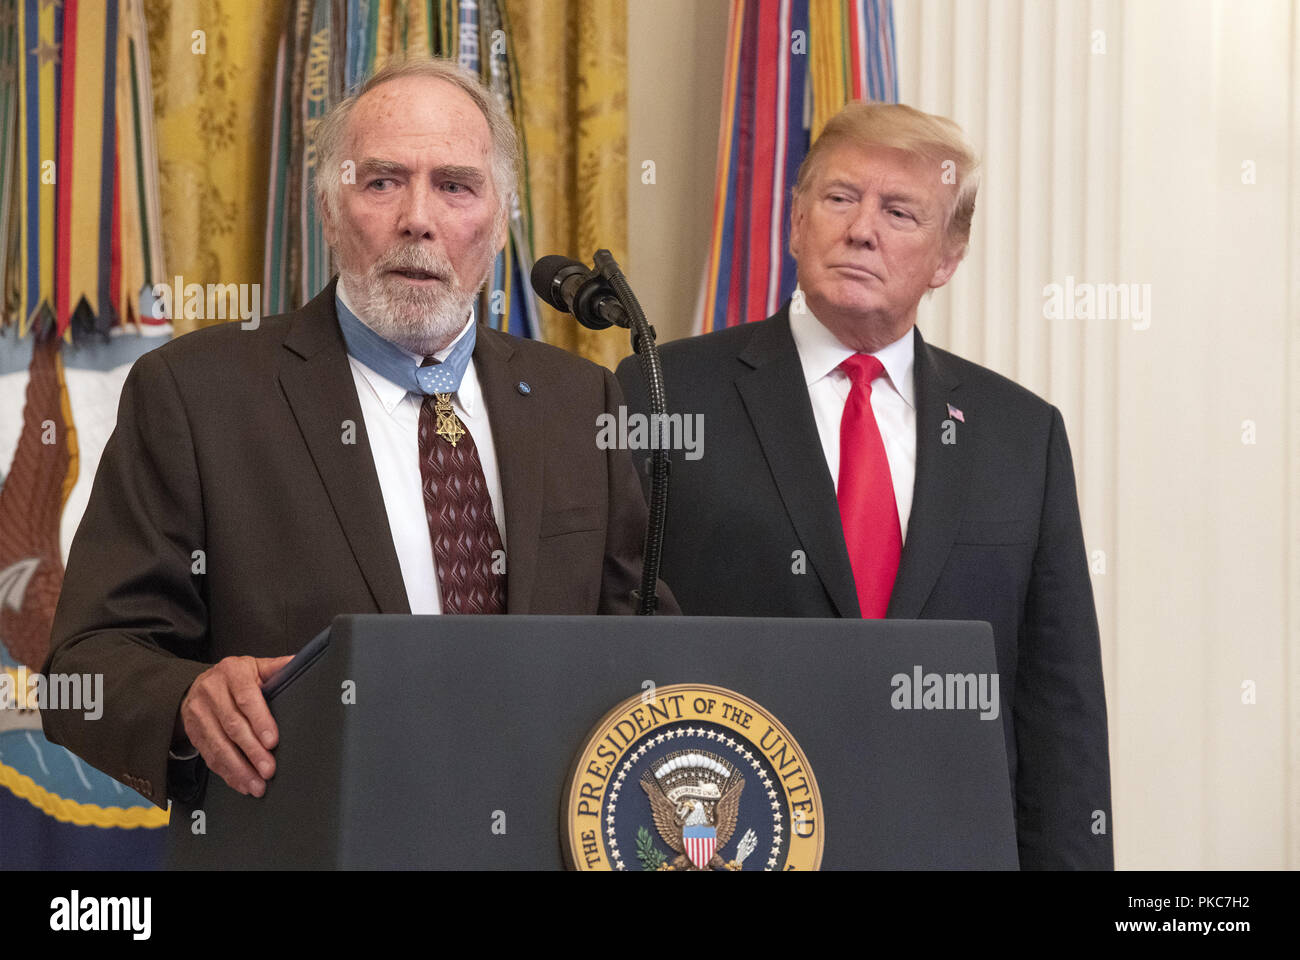 Washington, District of Columbia, USA. 12th Sep, 2018. United States Army Major Drew Dix (retired) a Congressional Medal of Honor recipient for heroism in the Vietnam War makes remarks at the Congressional Medal of Honor Society Reception as US President Donald J. Trump looks on from the right in the East Room of the White House in Washington, DC on Wednesday, September 12, 2018. Dix also serves as president of the Congressional Medal of Honor Society Credit: Ron Sachs/CNP/ZUMA Wire/Alamy Live News Stock Photo